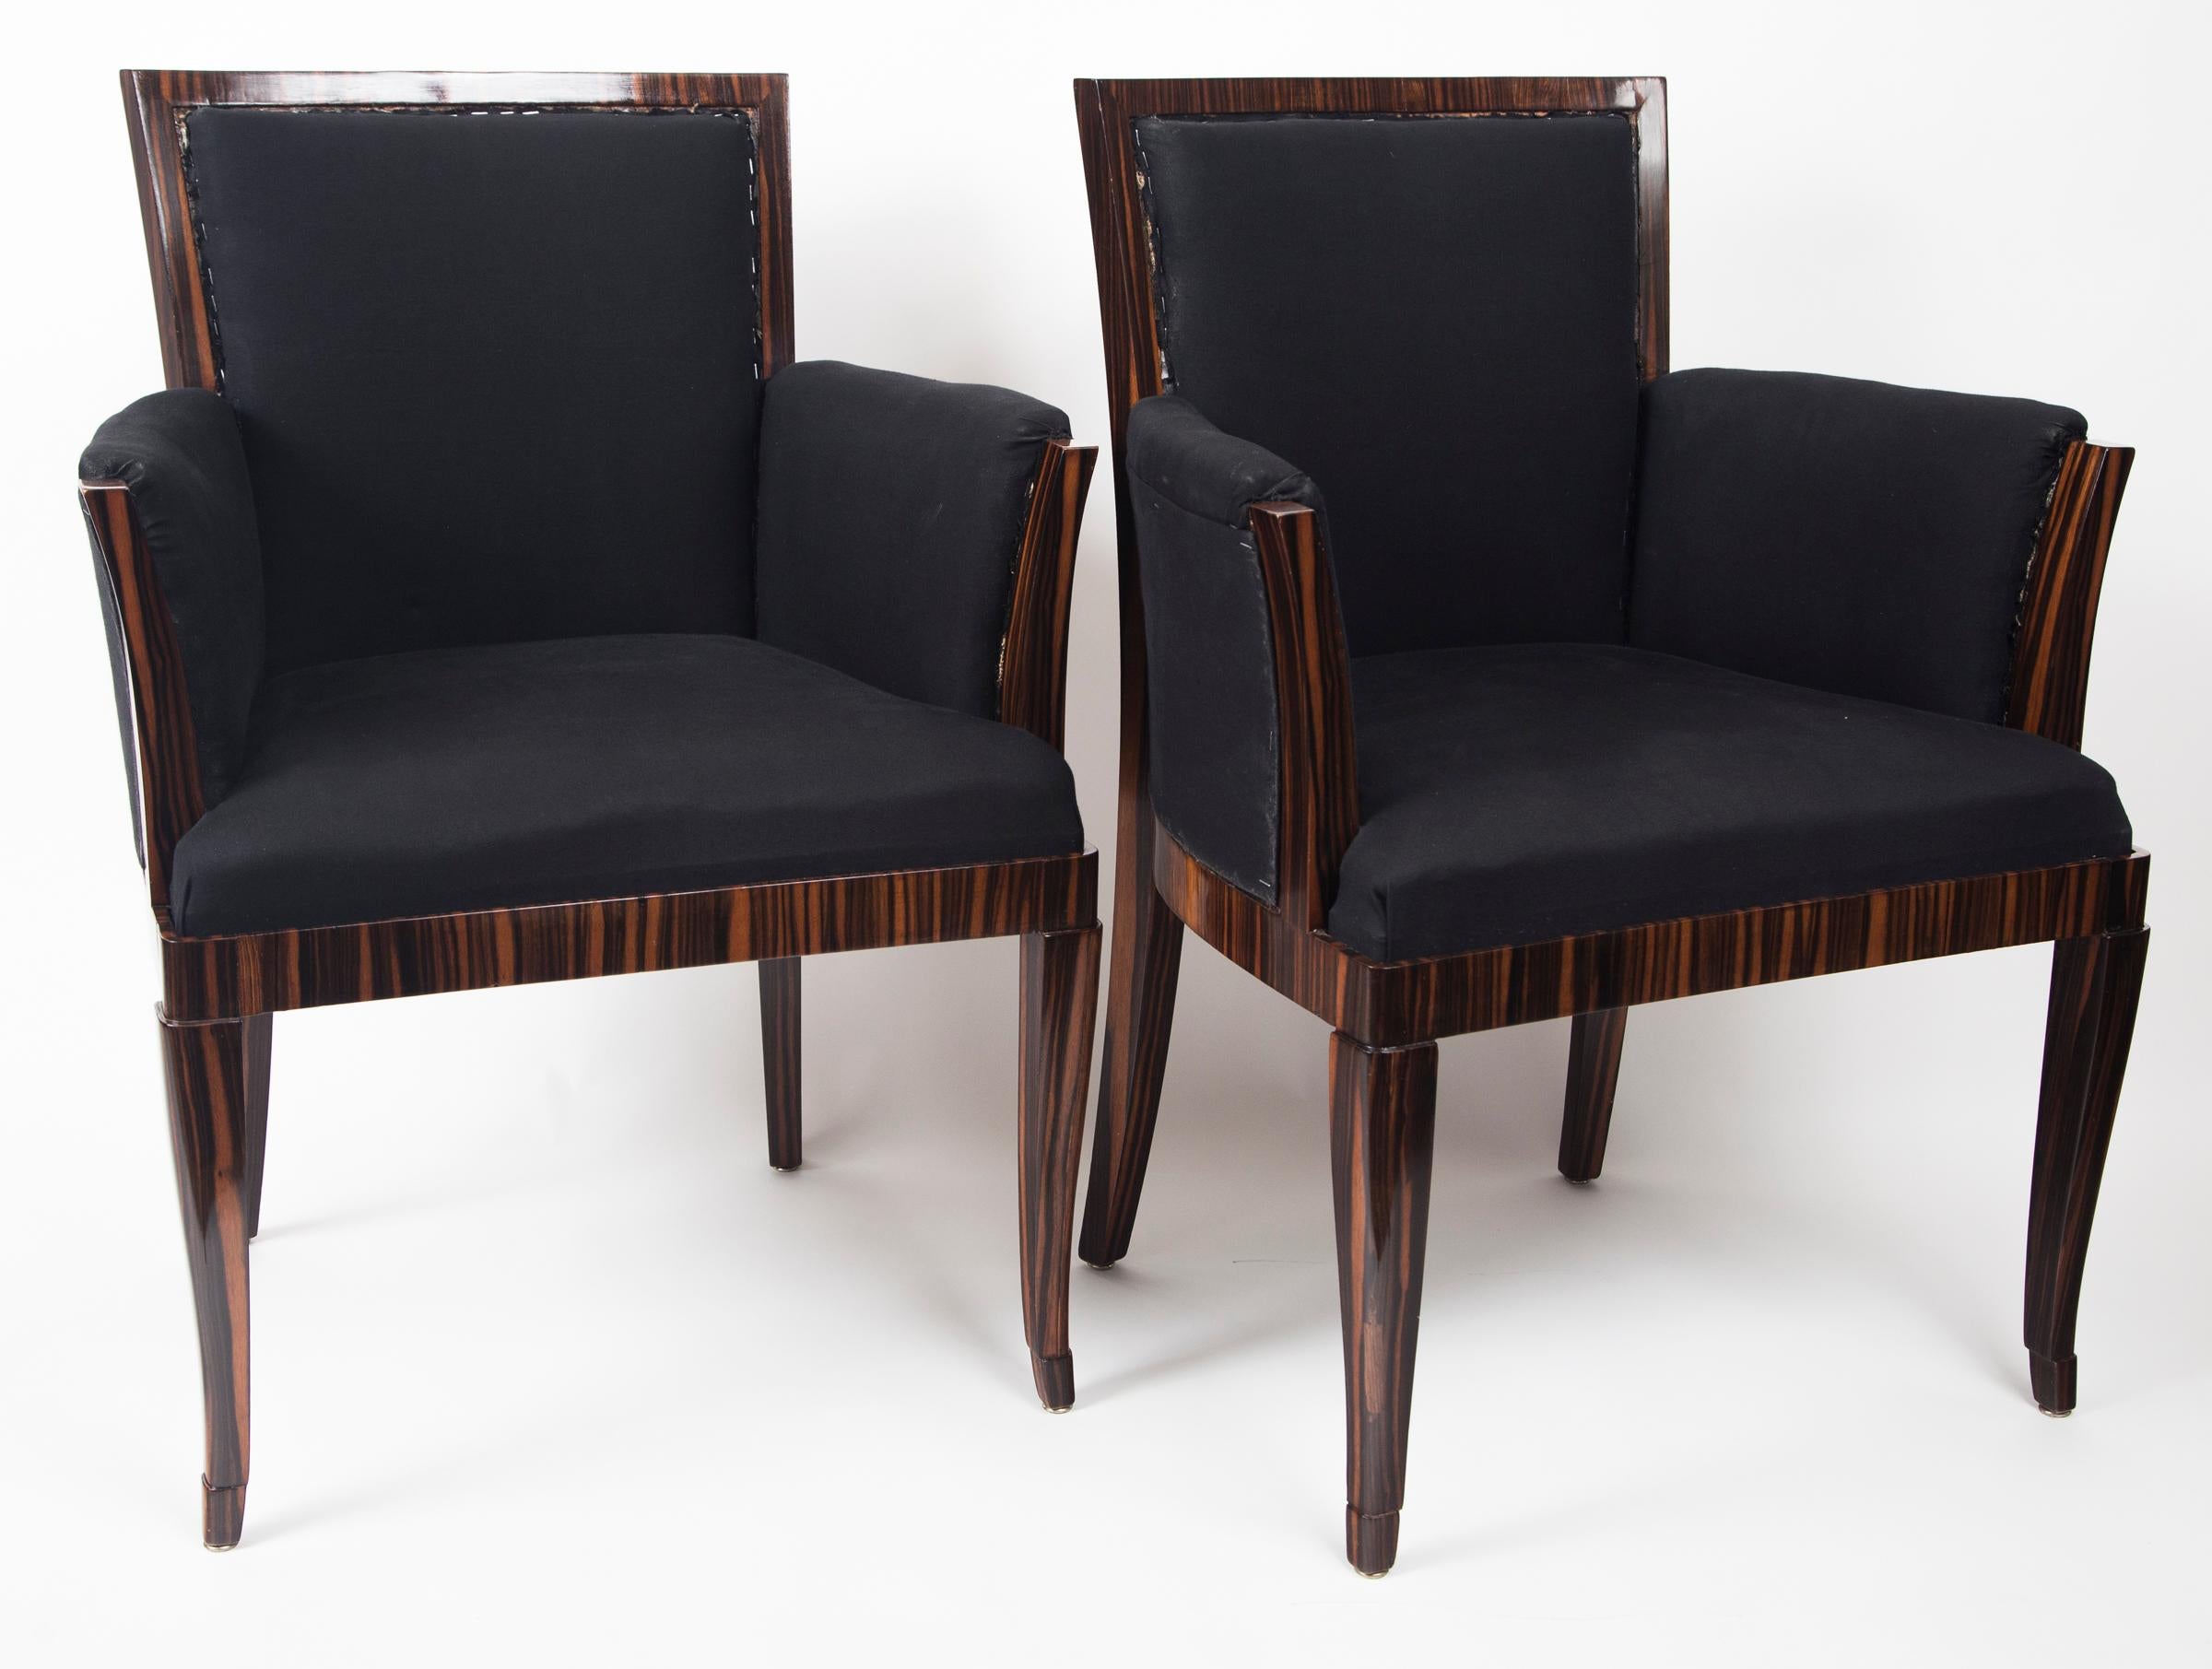 Sharp pair of upright upholstered Art Deco style Armchairs in Makassar ebony upholstered in a dark blue muslin- fabric ready.
Note, very comfortable upright chairs ideal for a desk setting or game playing or for smaller scale area
Origin: